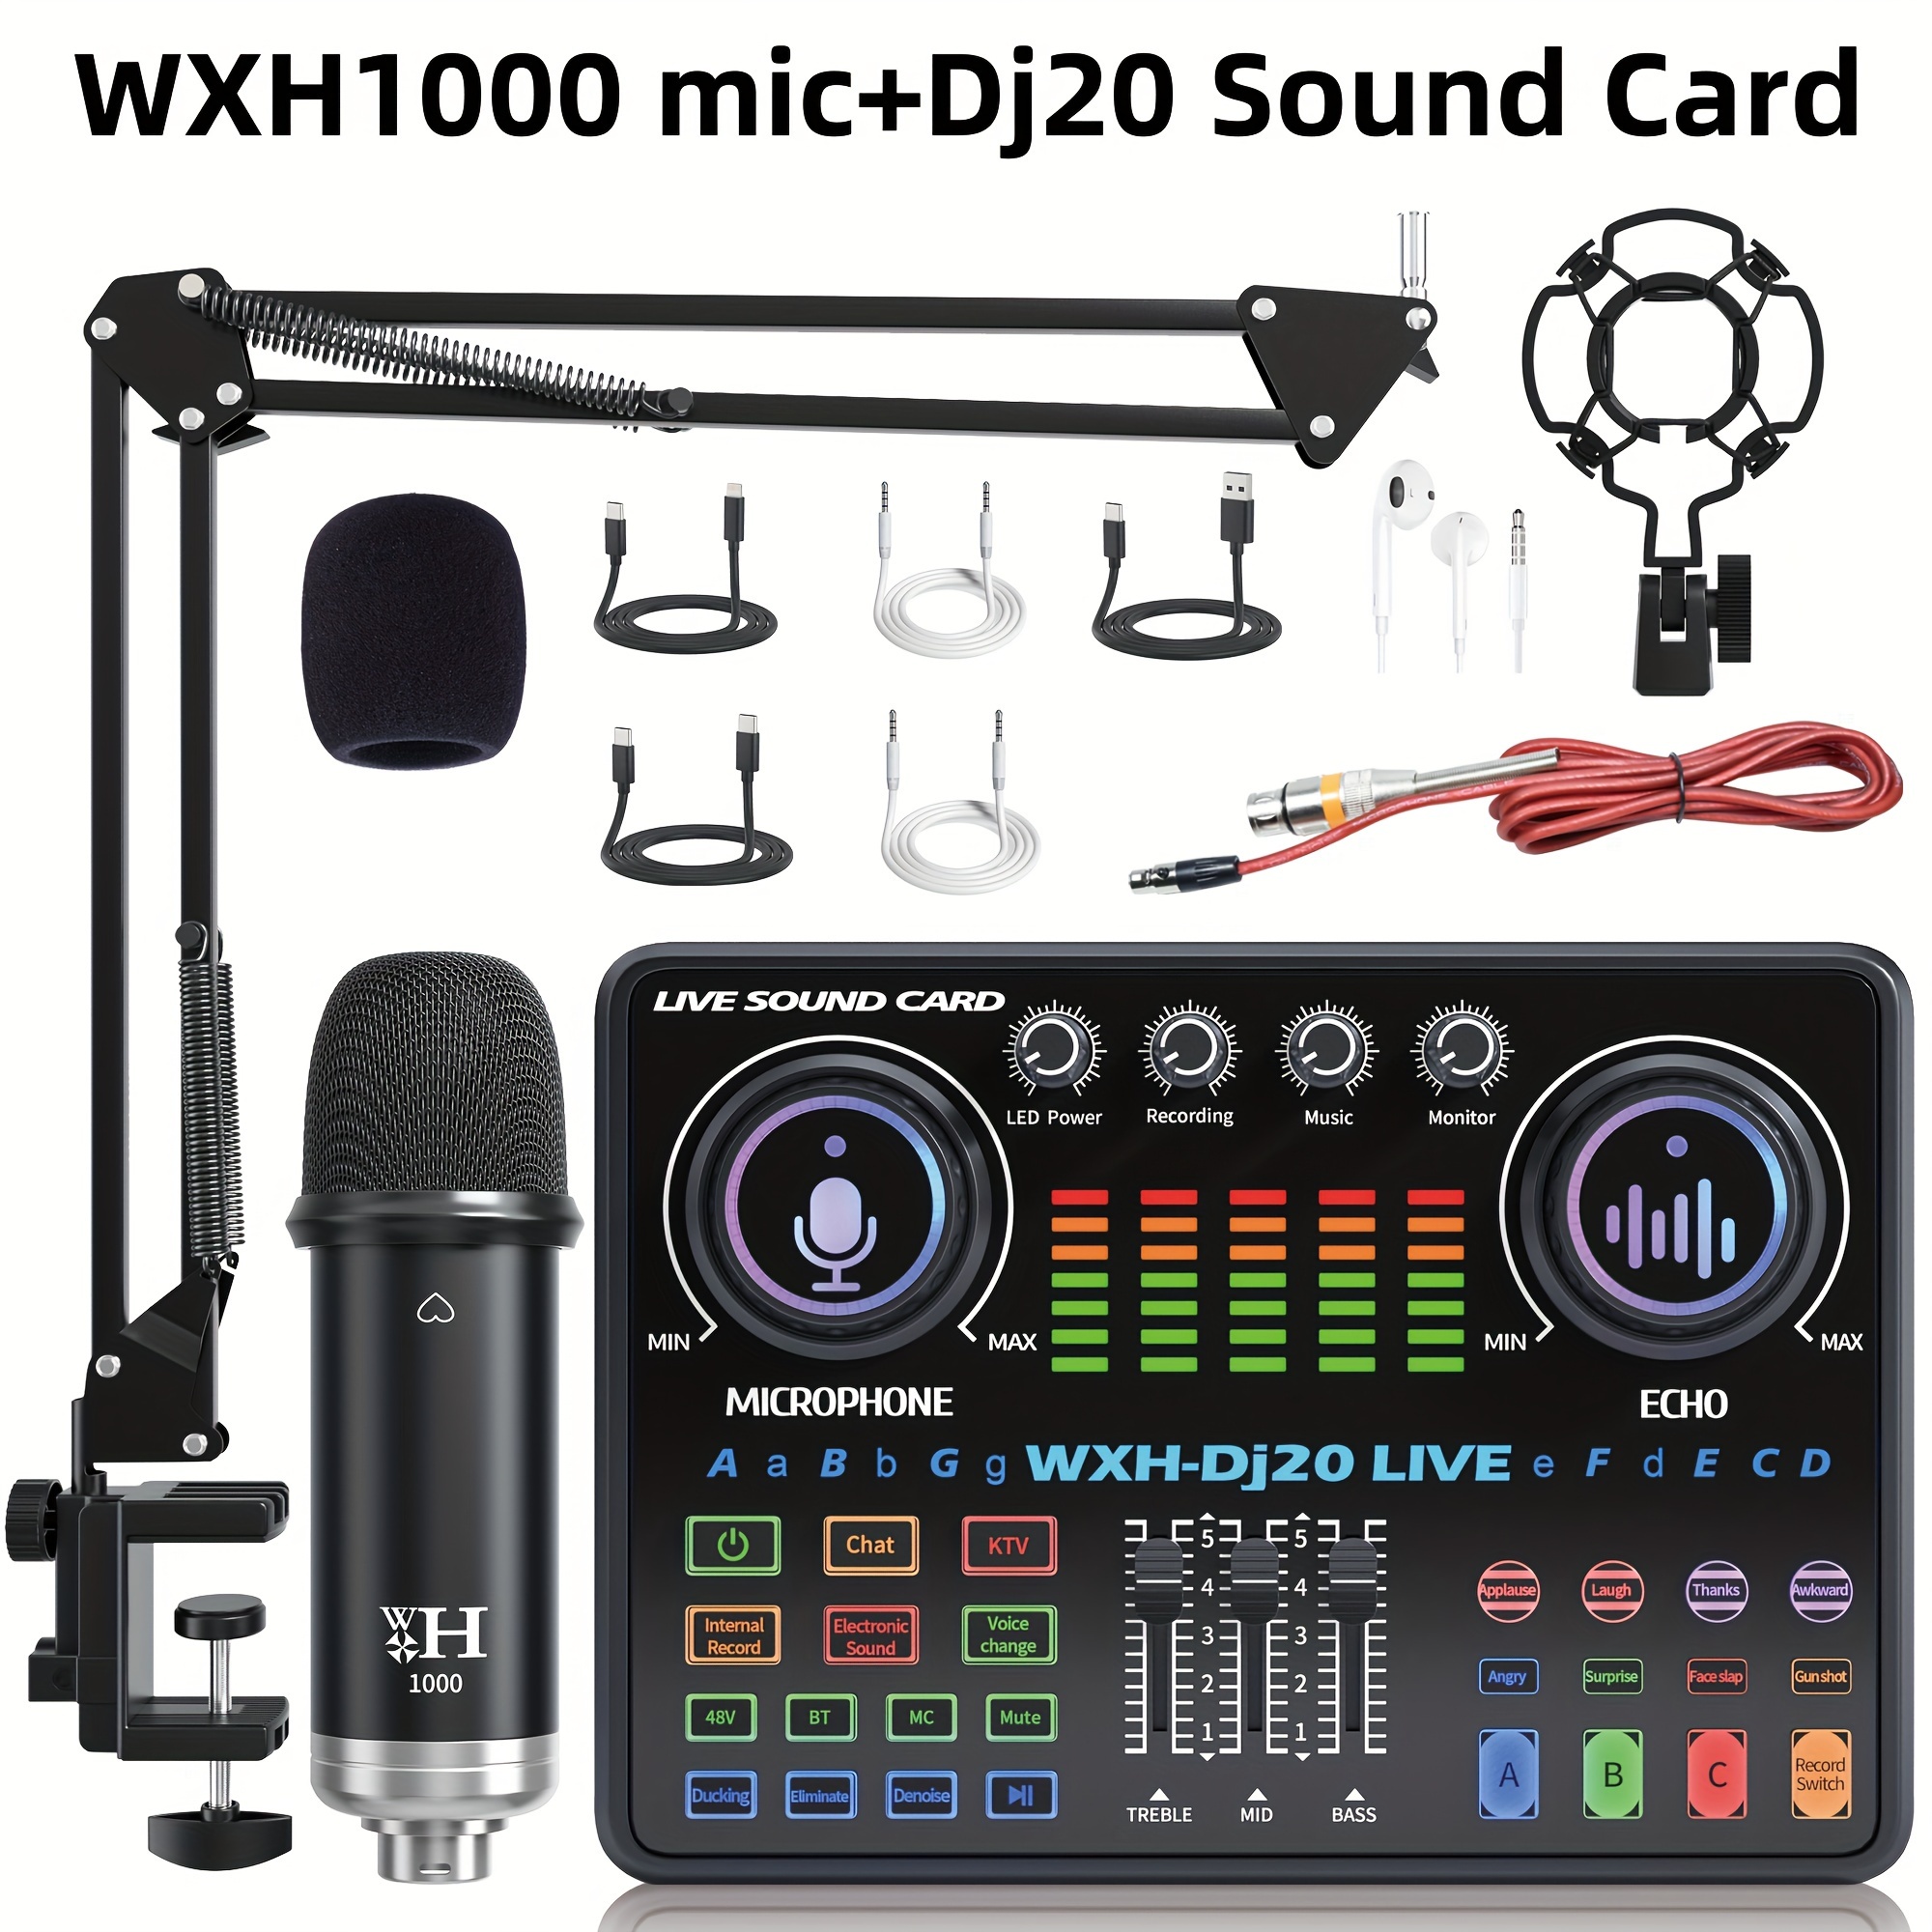 

Professional Dj20 Live Sound Card For Bm800 Microphone, Podcast, Recording, And Live Streaming - Your Perfect Choice For Recording, Broadcasting, And Live Streaming